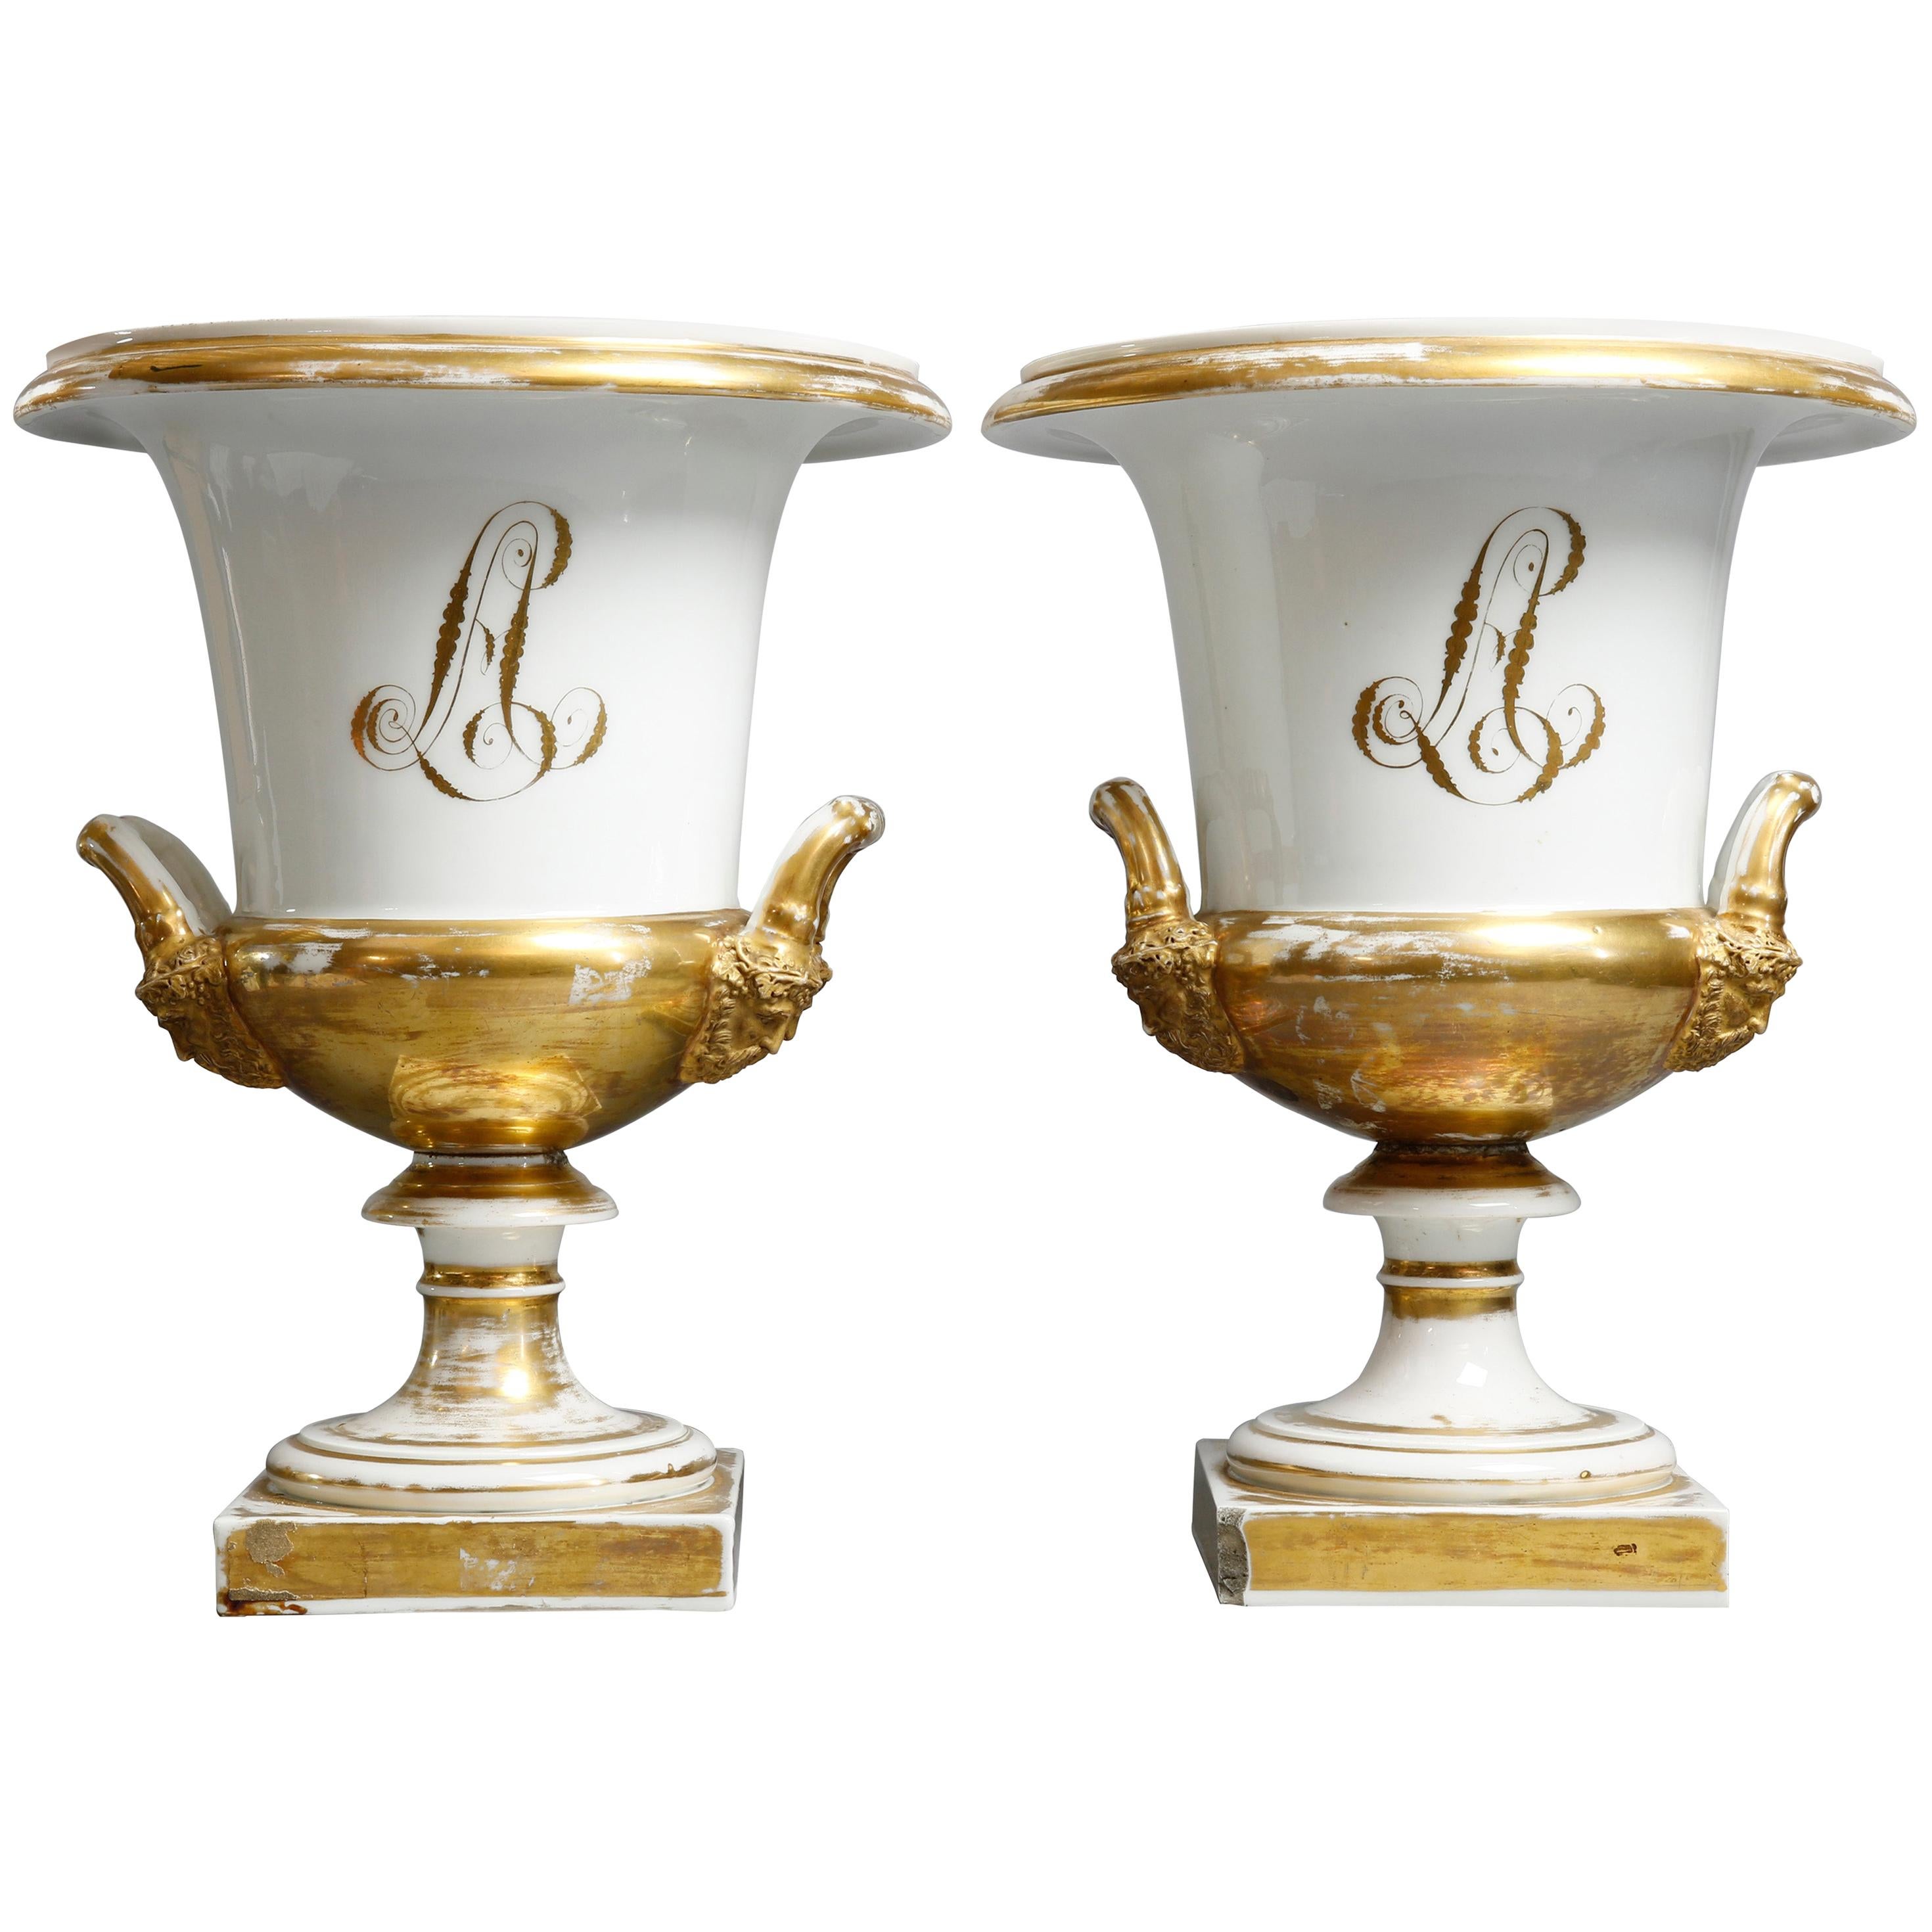 French Old Pairs Gilt Porcelain Classical Urns with Grecian Masks, circa 1880